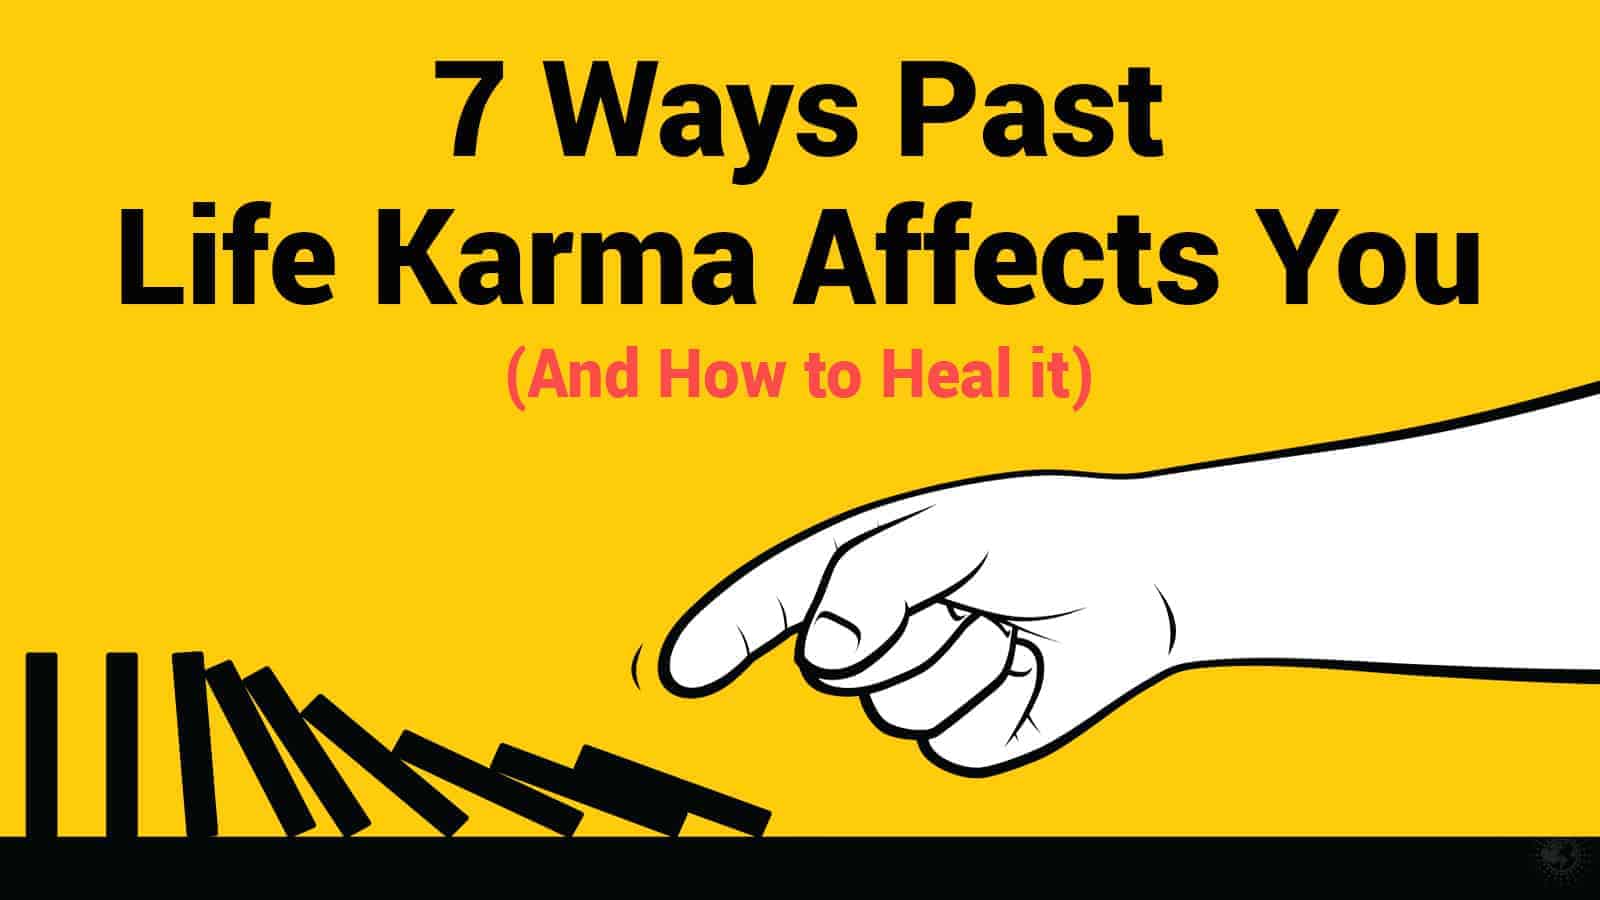 7 Ways Past Life Karma Affects You (And How to Heal it)